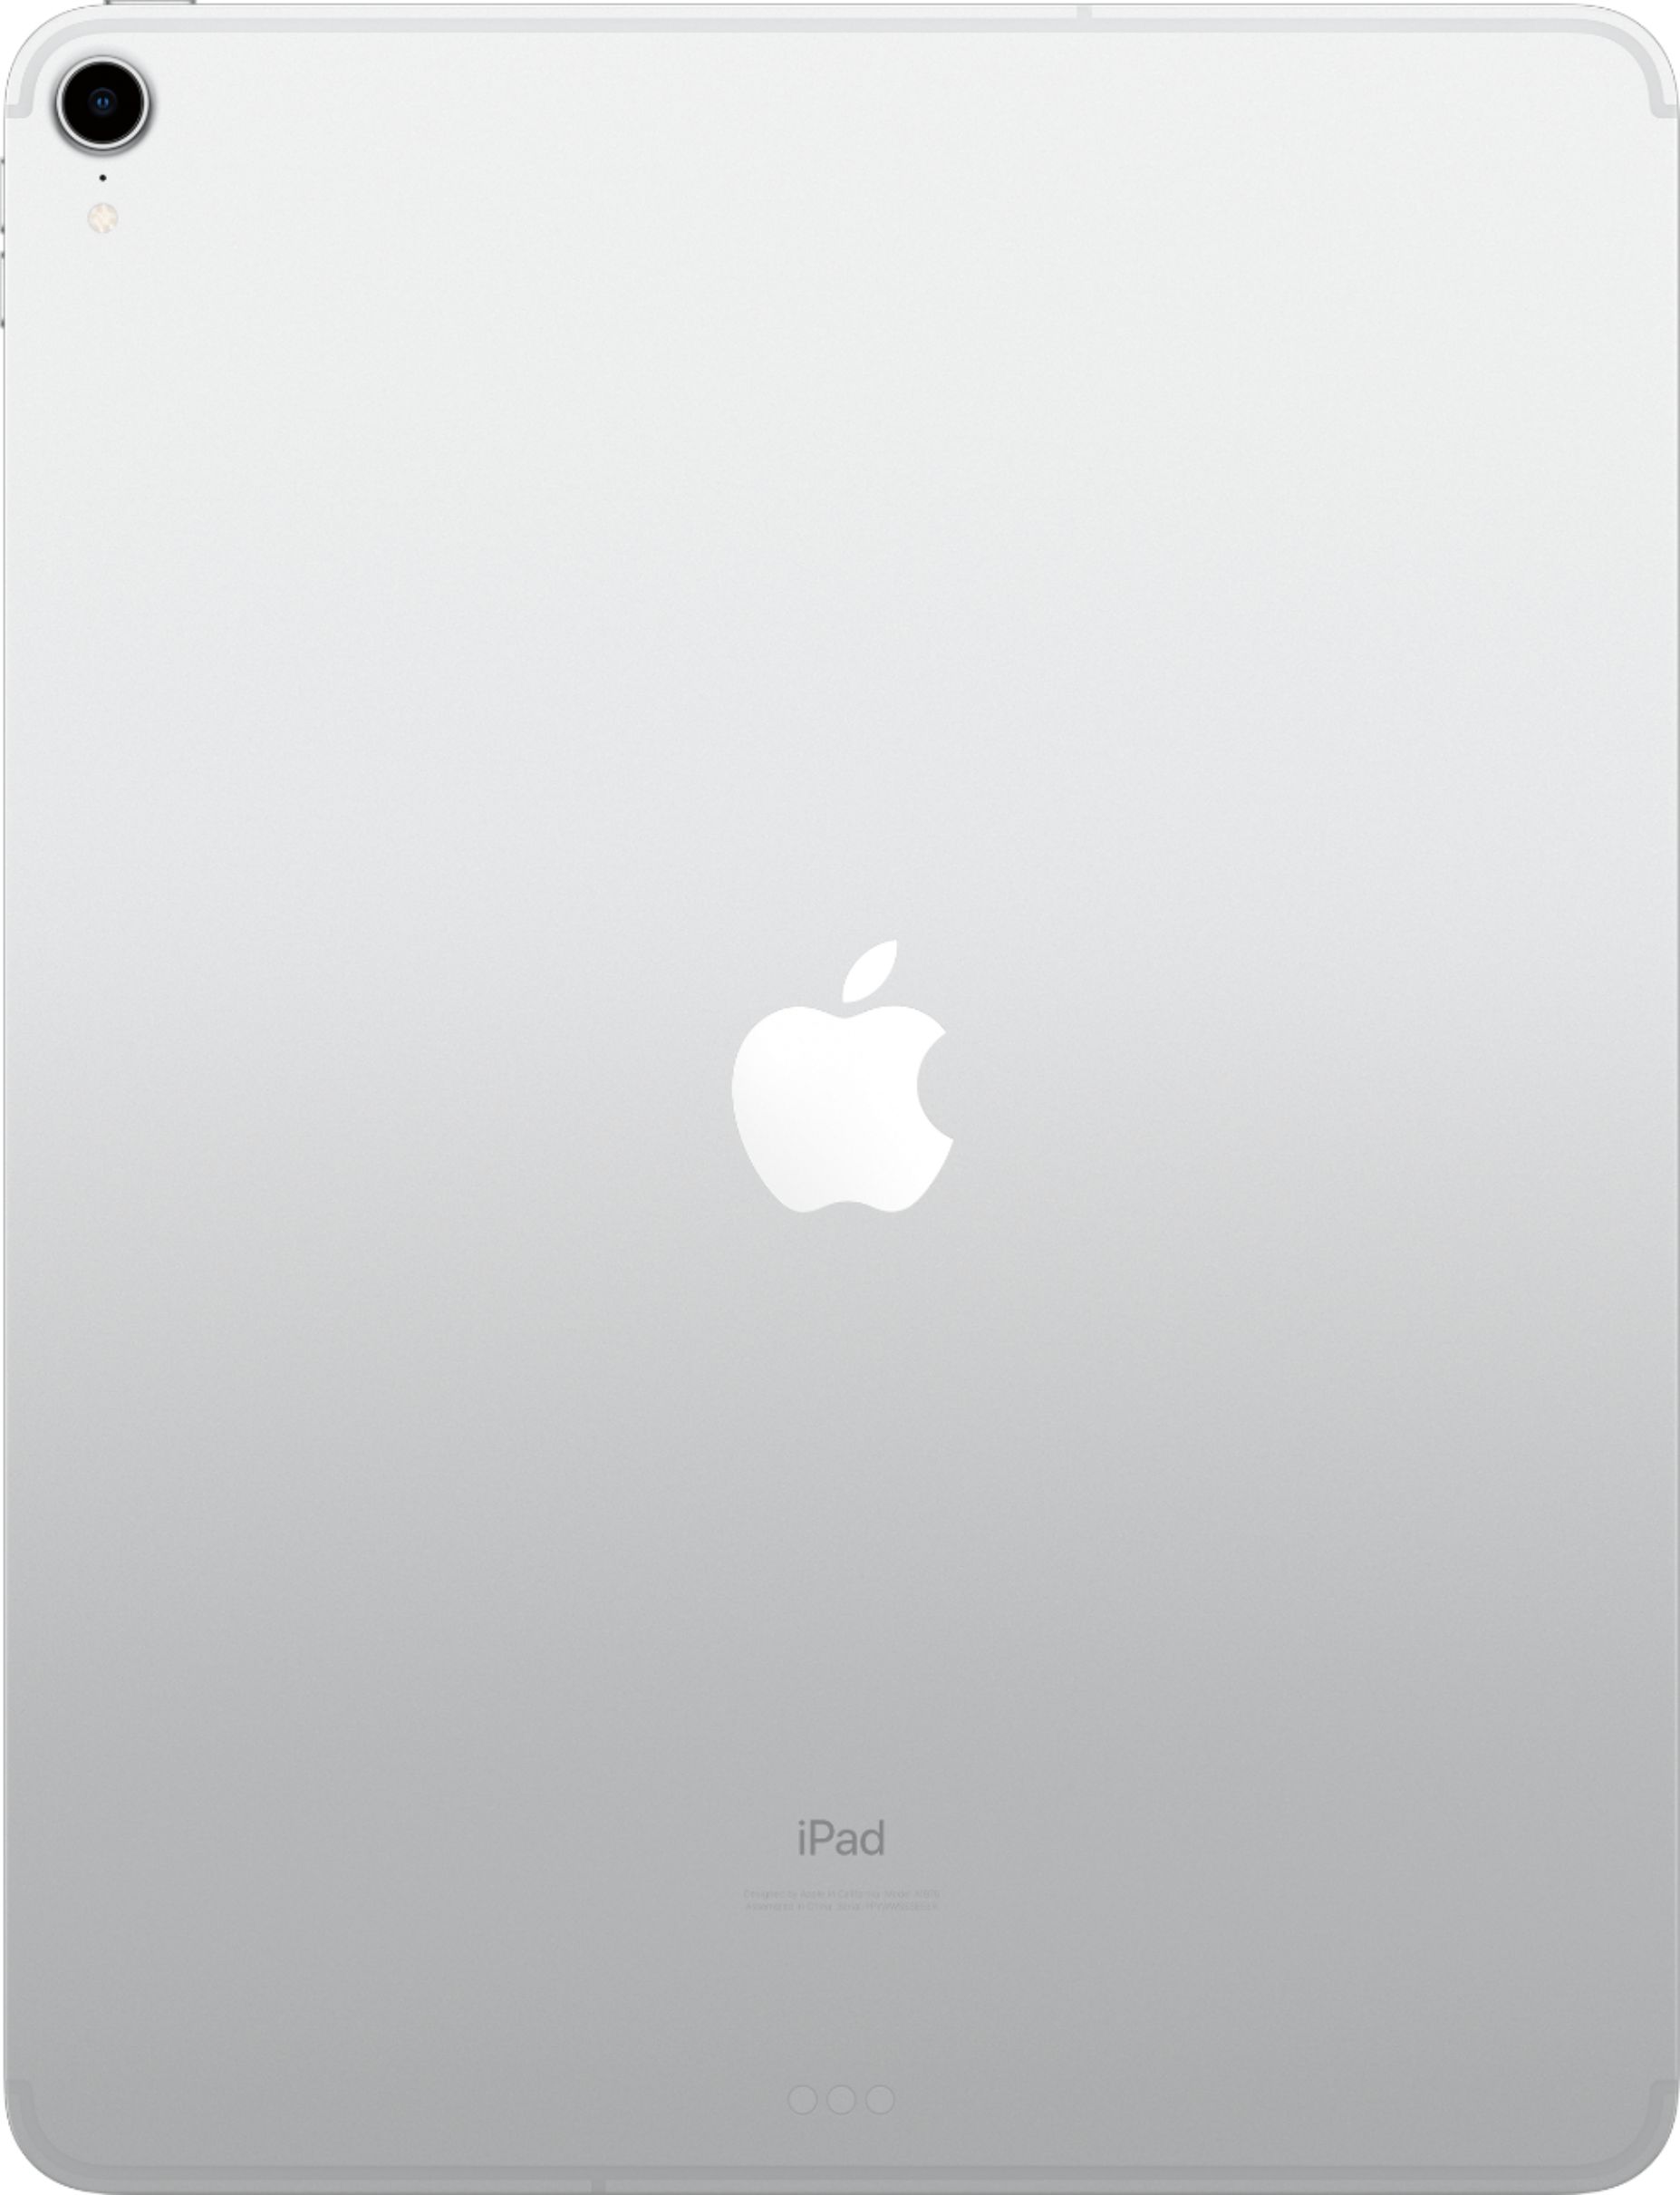 Back View: Apple - 12.9-Inch iPad Pro (4th Generation) with Wi-Fi + Cellular - 1TB (Unlocked) - Space Gray